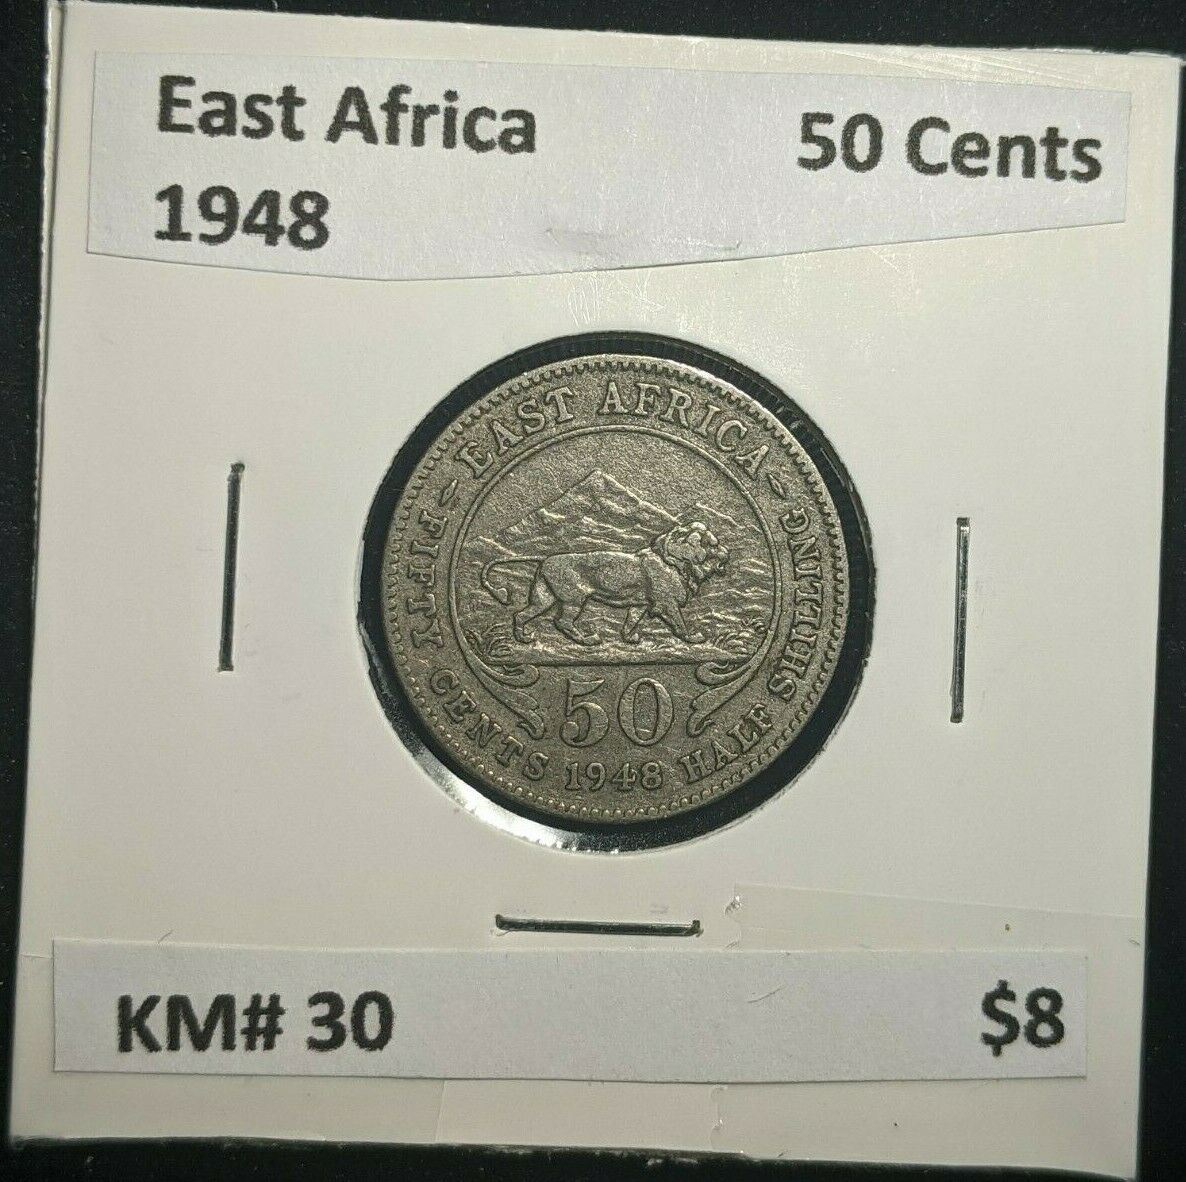 East Africa 1948 50 Cents KM# 30 #1525